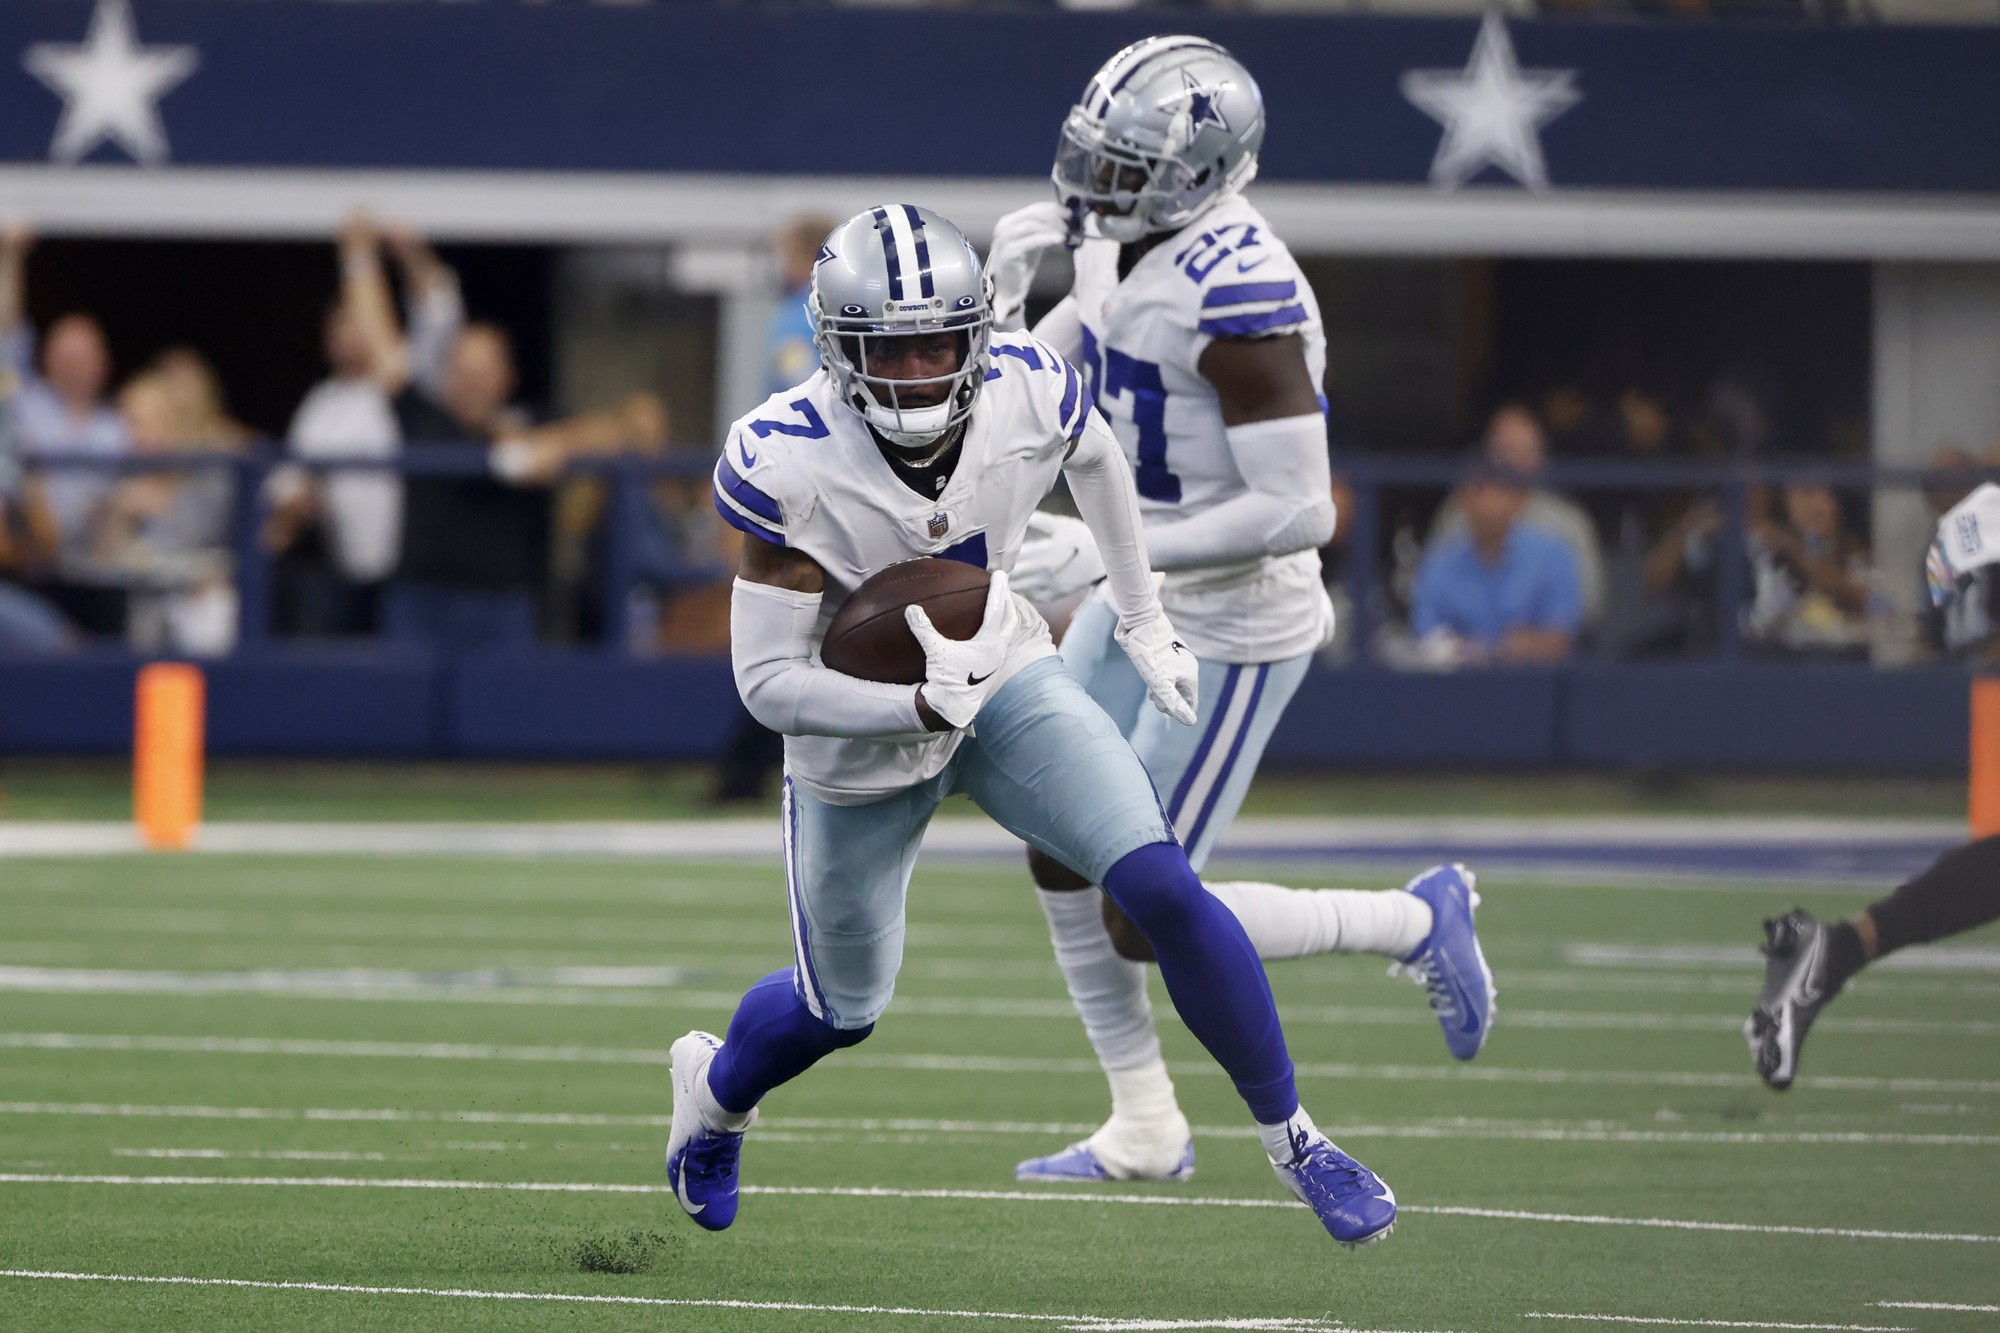 Sports Take: The Dallas Cowboys are the best team in the NFC East | The Baylor Lariat